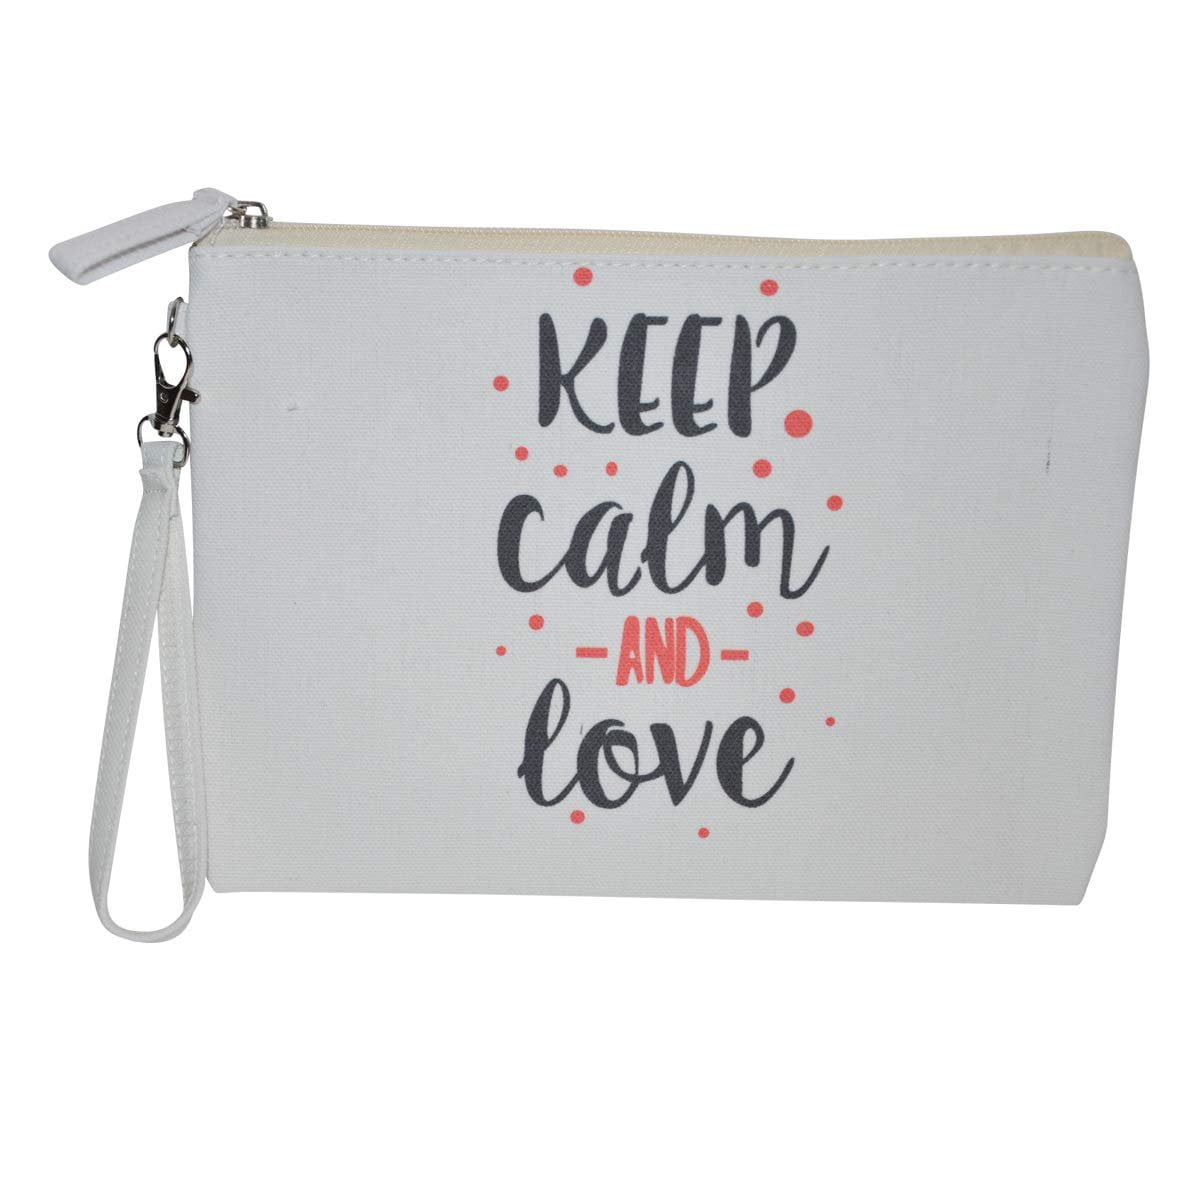 Etsy Finds Cute Makeup Bags from TheCoffeeCorner  GIVEAWAY  Shop with  Kendallyn